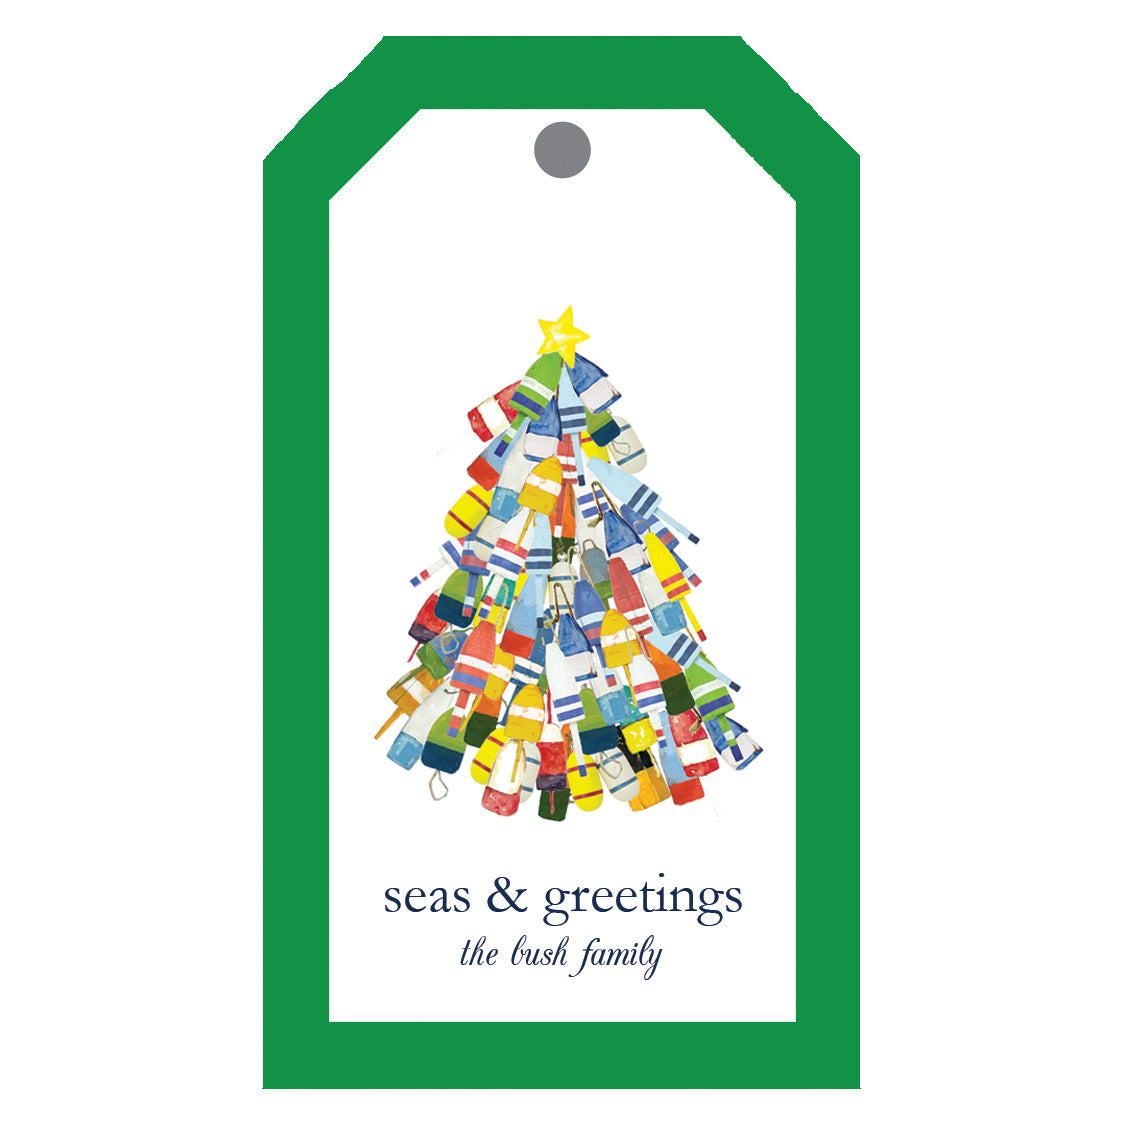 Holiday Gift Tags - Christmas Trees Pink + Green — DIZZY DAISY